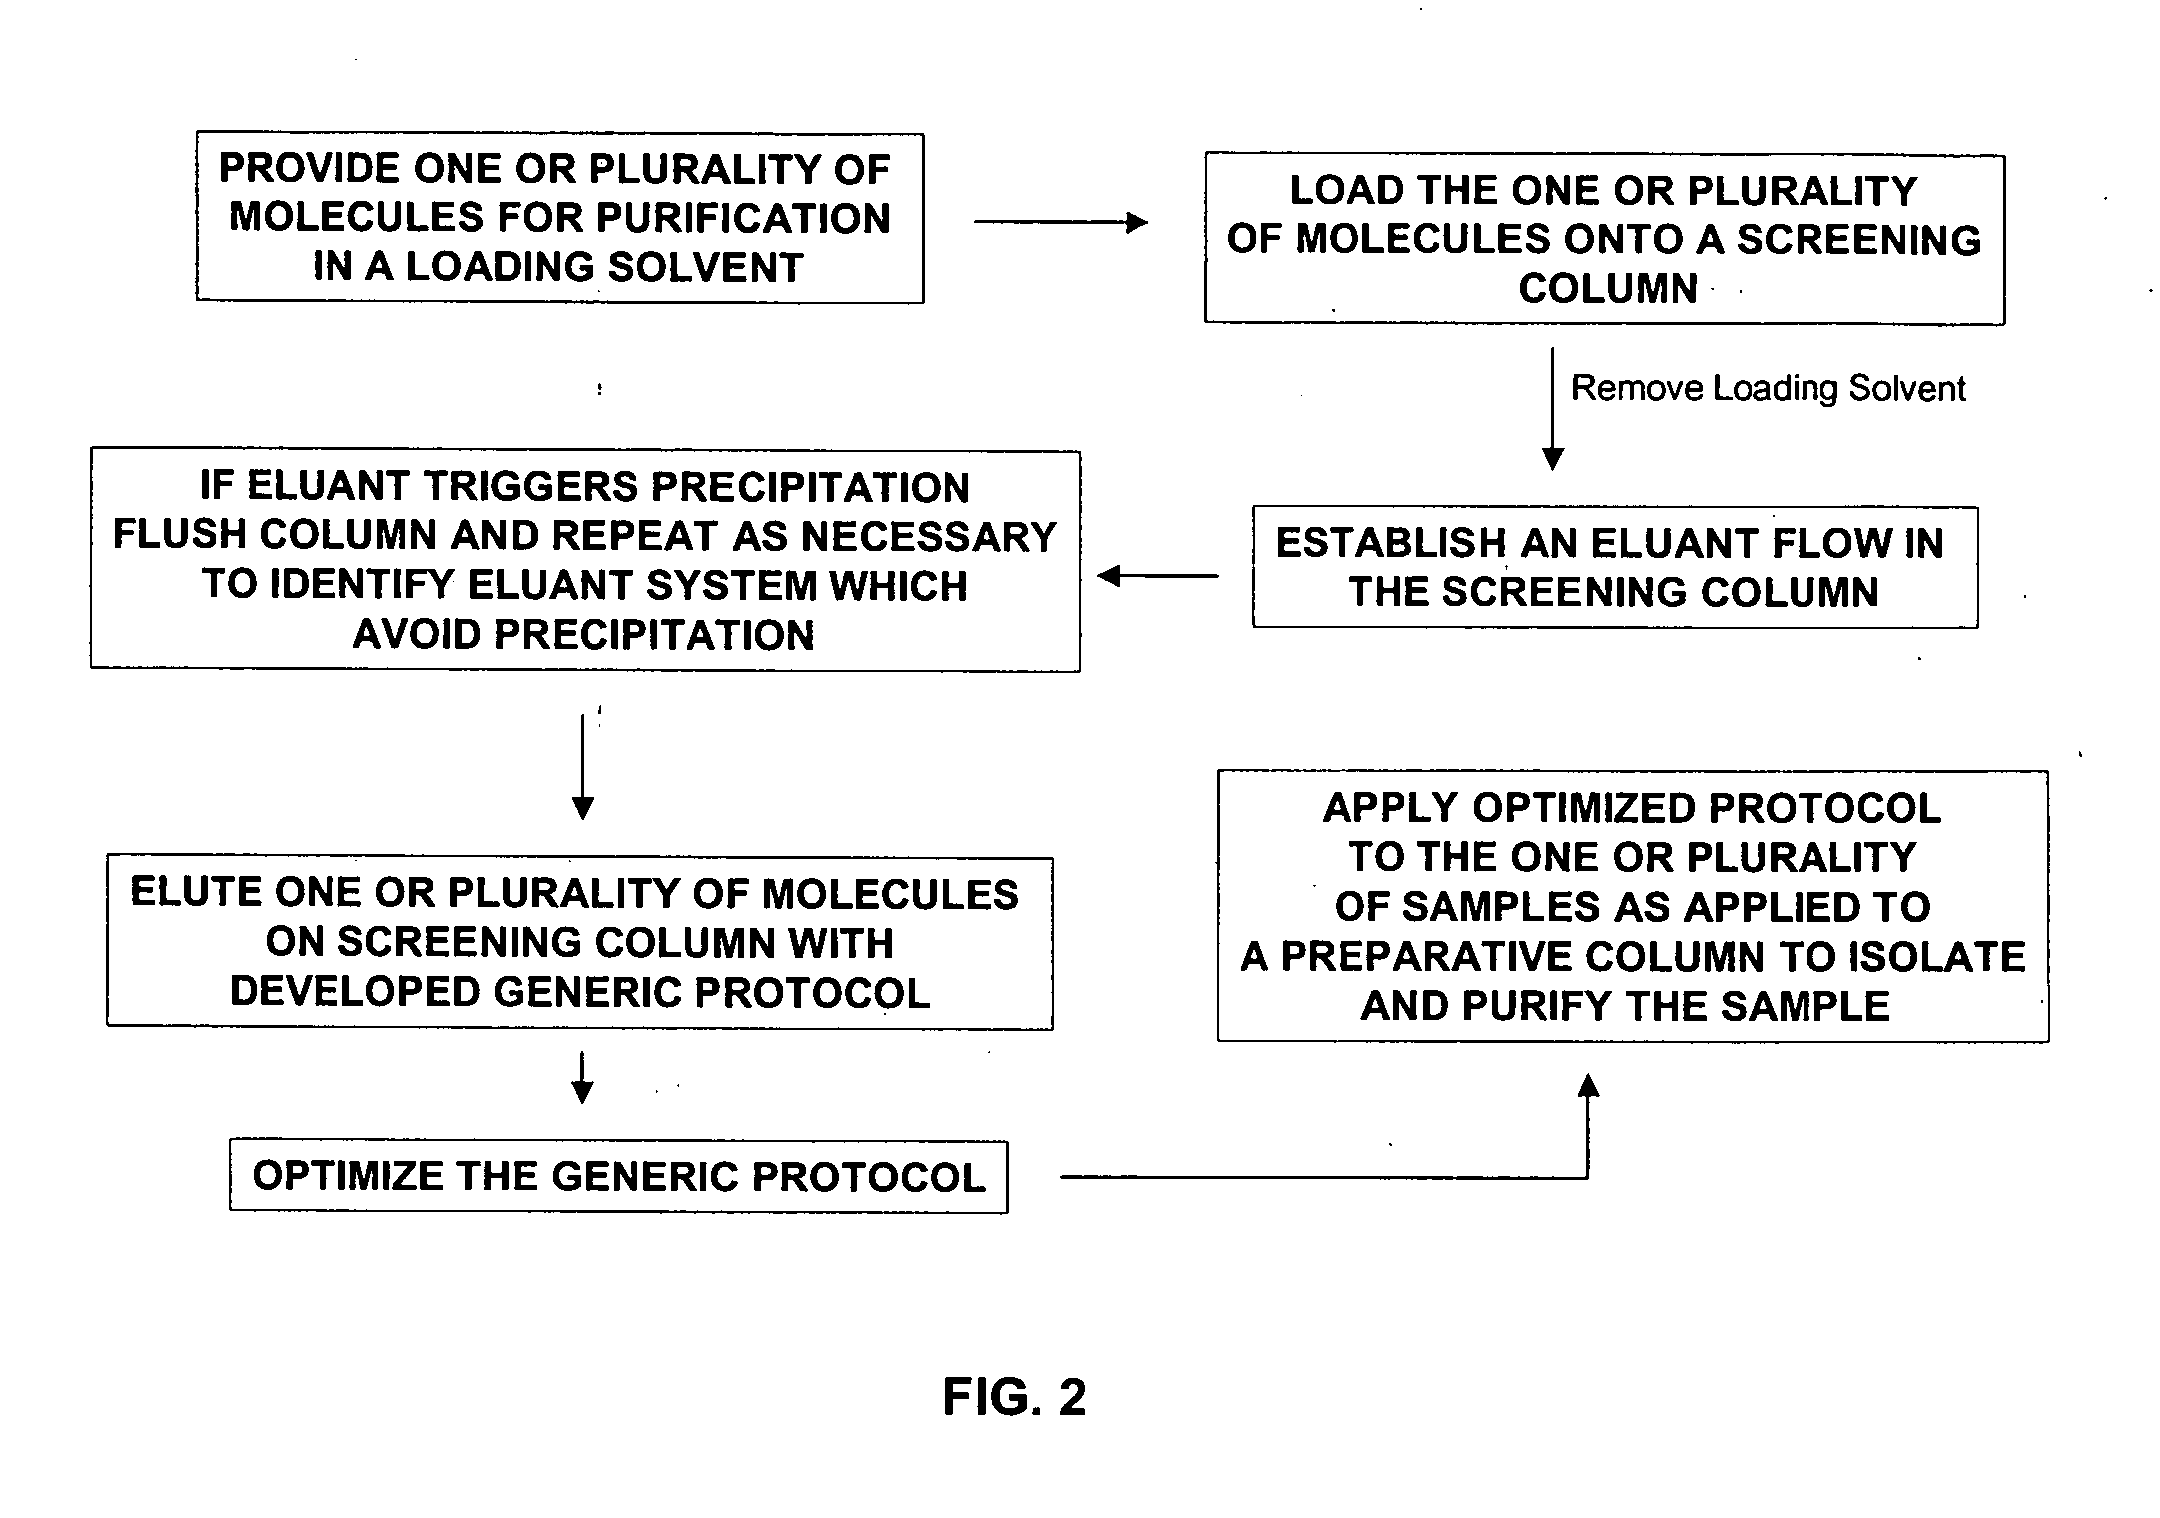 High throughput screening, purification and recovery system for large and small molecules